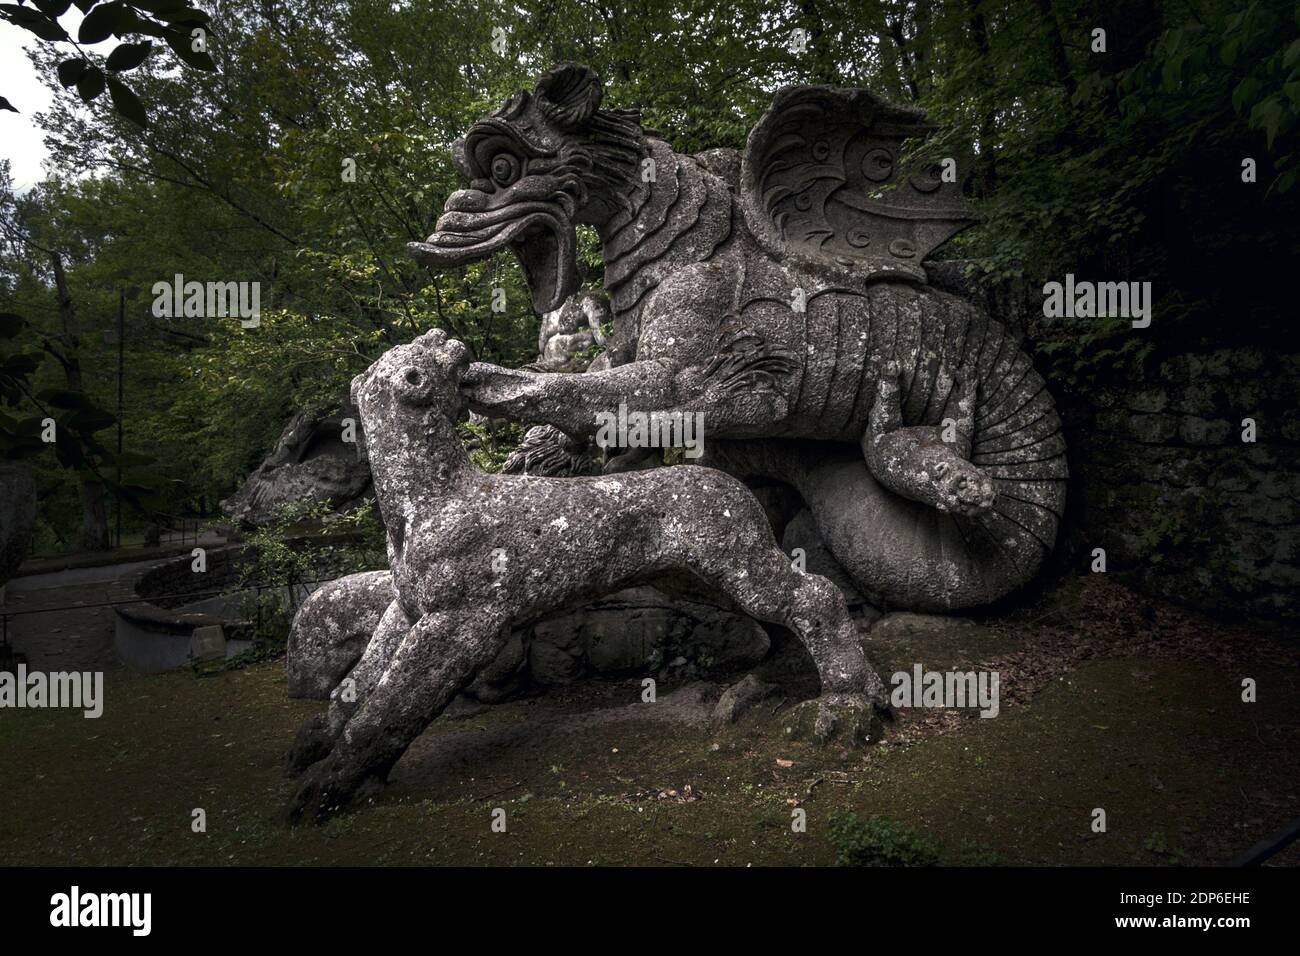 The large statue of the Dragon bitten by a lion and a  at the famous Gardens of Bomarzo, Viterbo Stock Photo